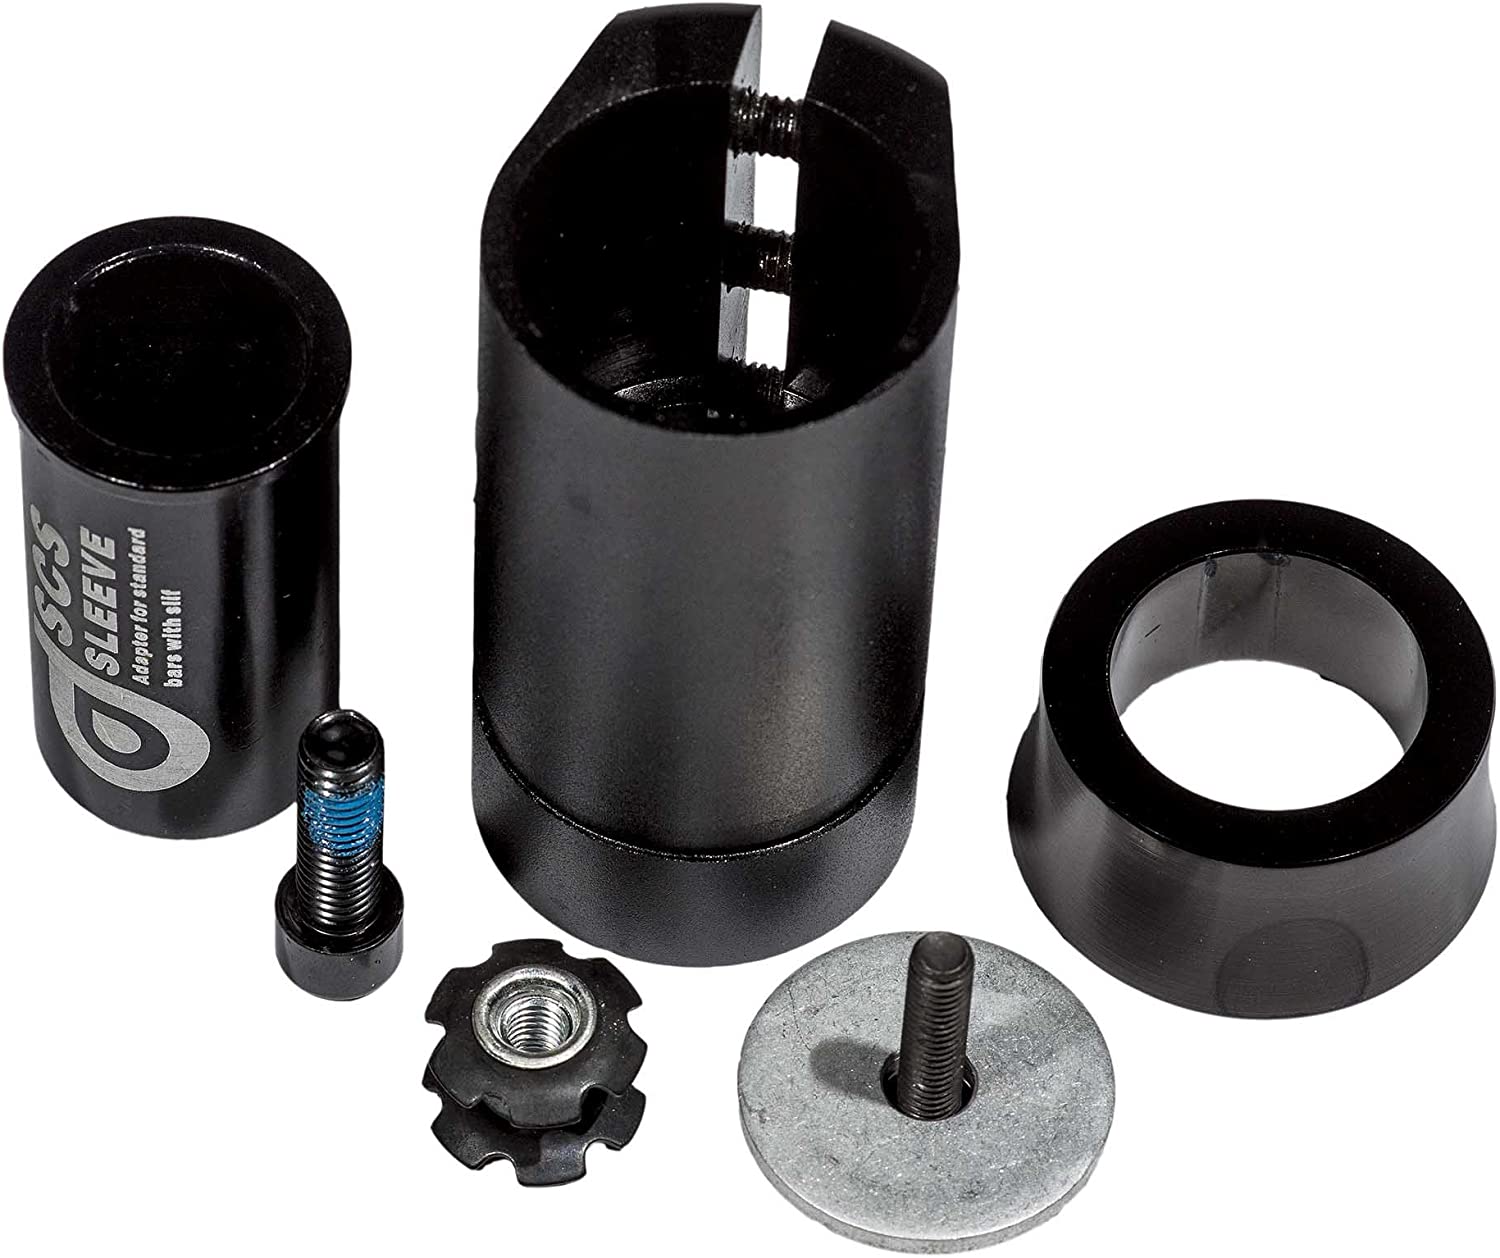 District Scooters S-Series Pytel / SCS Convertion Kit Black